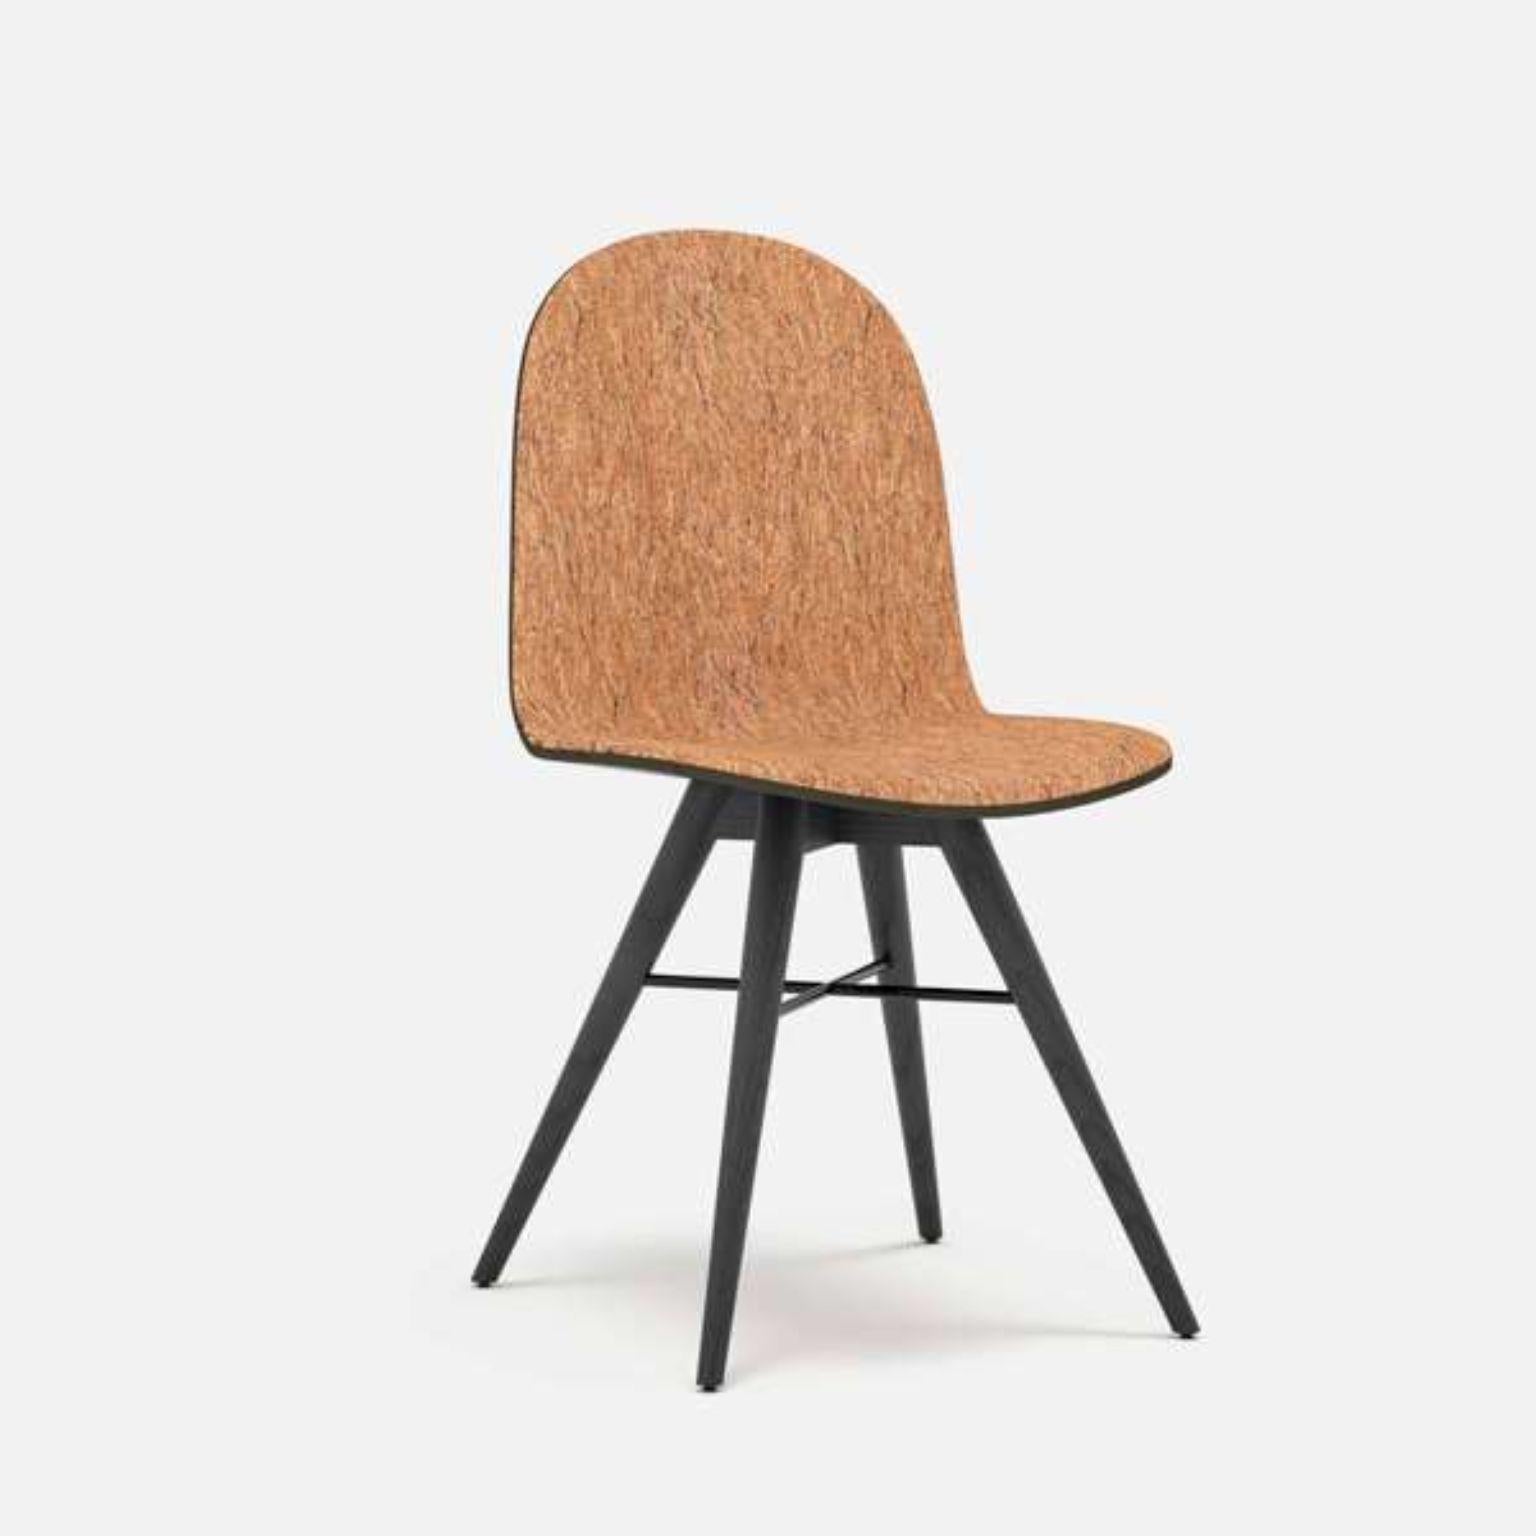 Black painted ash and corkfabric contemporary chair by Alexandre Caldas
Dimensions: W 40 x D 40 x H 80 cm
Materials: Painted ash solid wood, corkabric

Structure available in beech, ash, oak, mix wood
Seat available in fabric, leather,